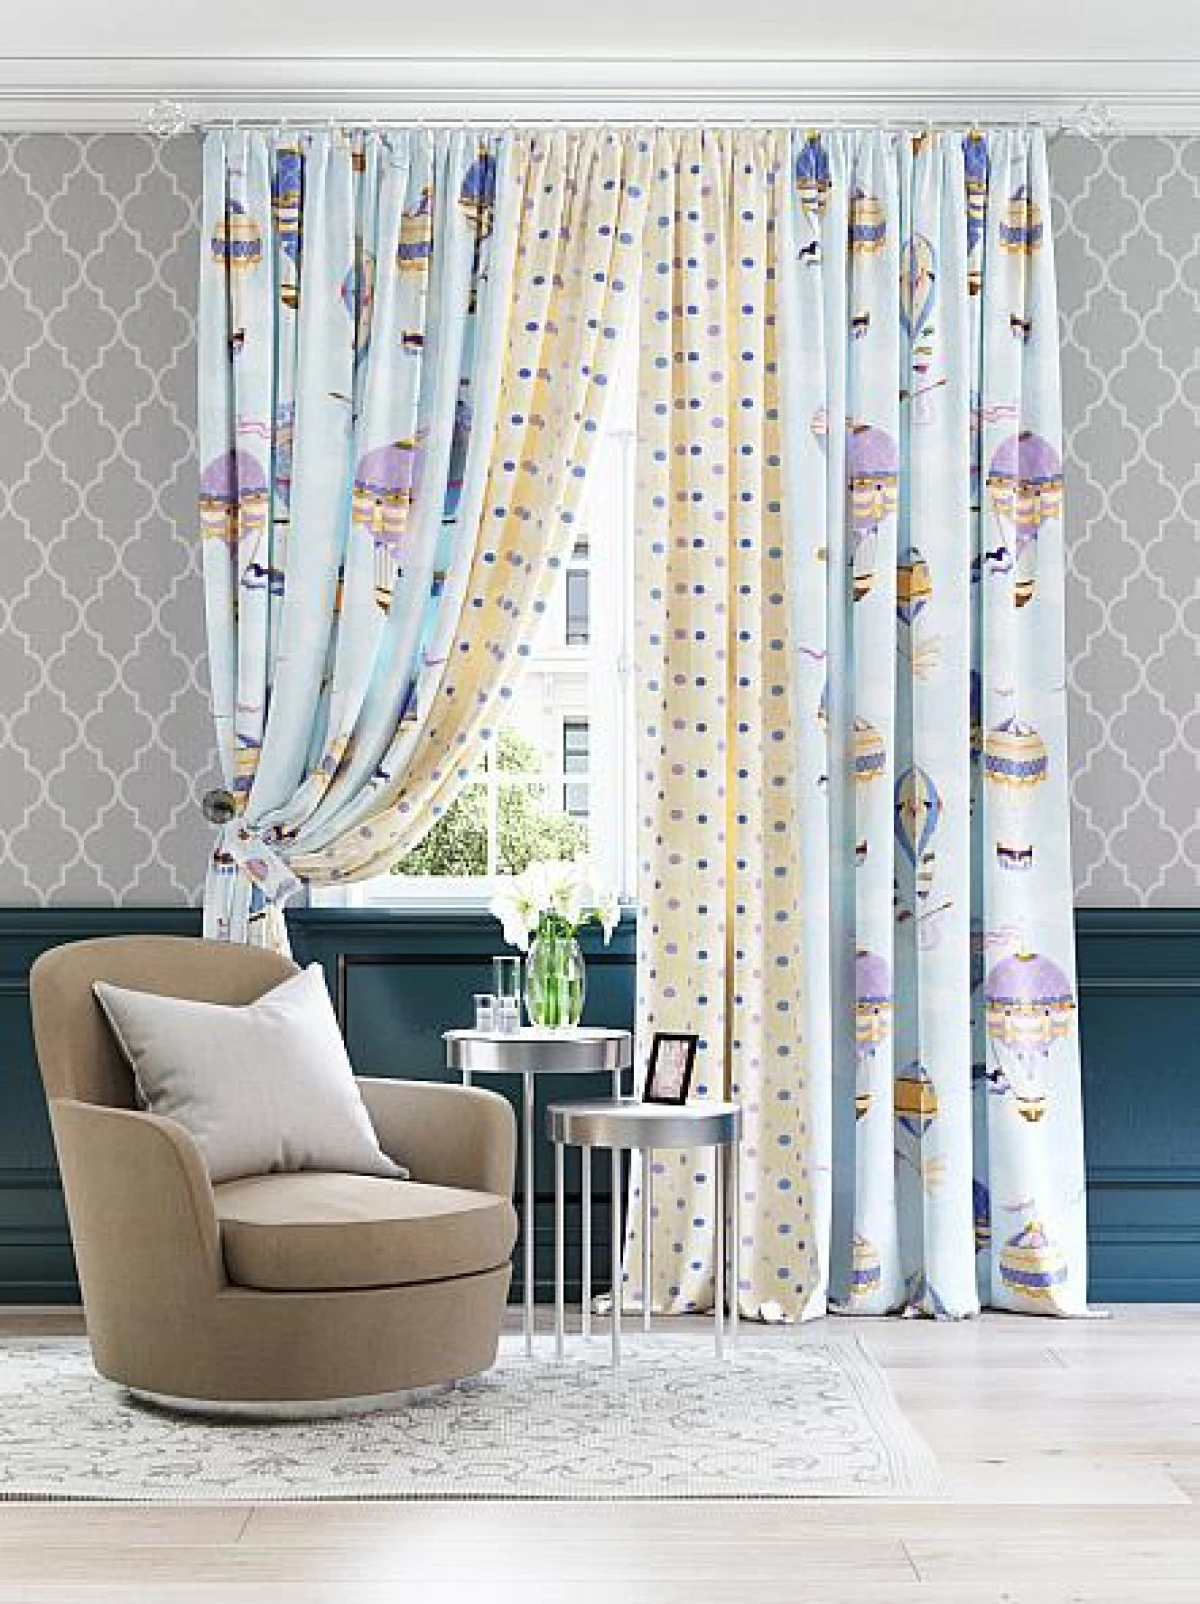 7 lifhacks for the perfect selection of curtains 2716_3